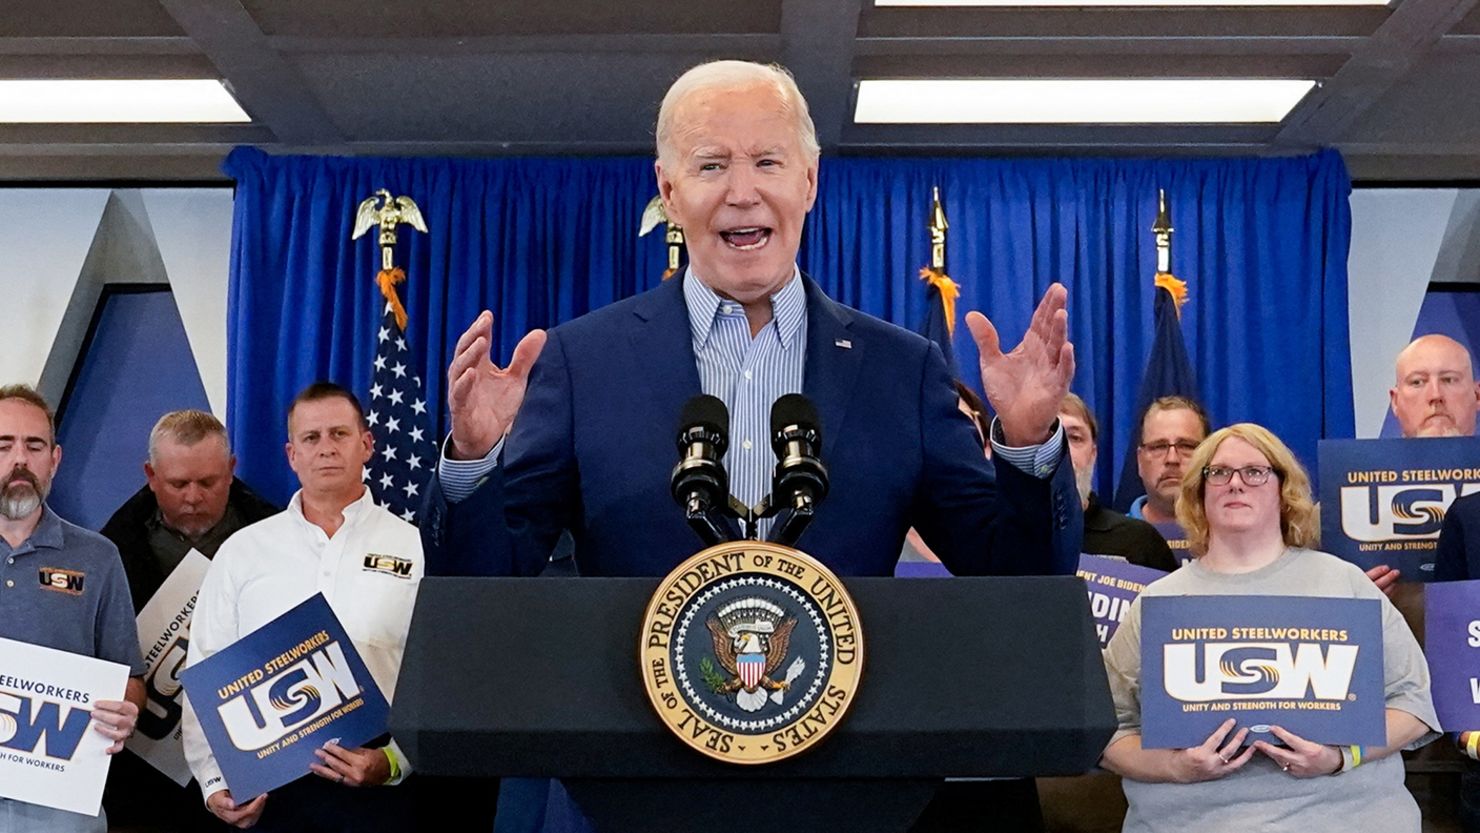 Biden proposes tariff hike on Chinese metal imports to aid steelworkers (Credits: CNN)